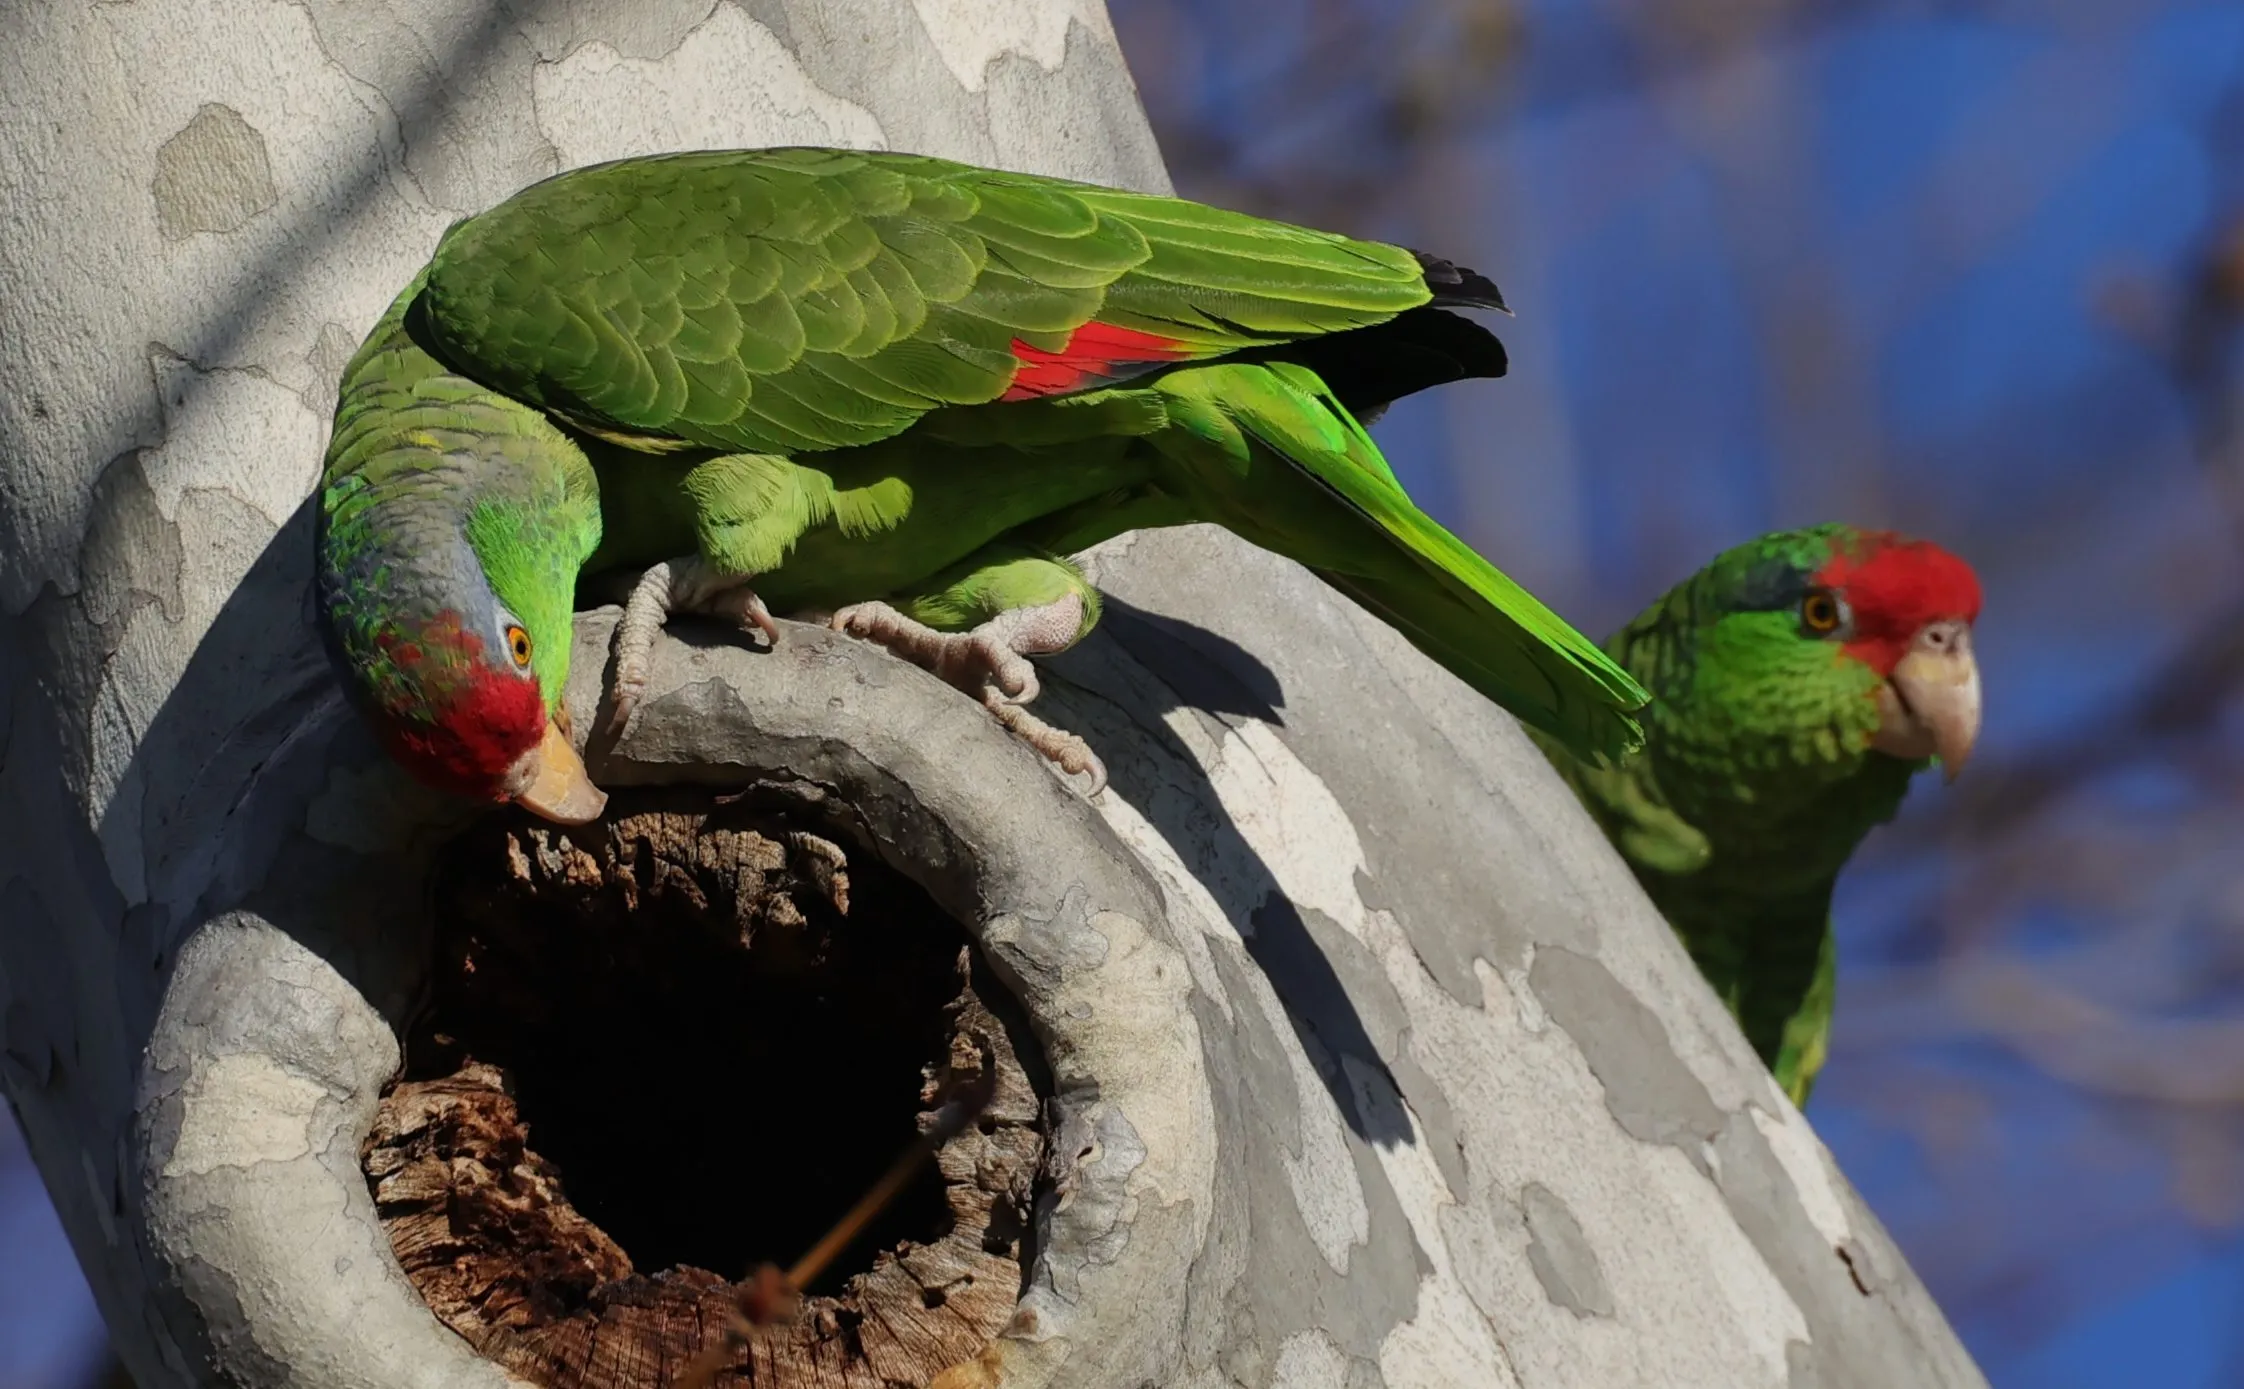 Rare Parrots Grace San Diego's Beaches: A Story of Resilience and Beauty